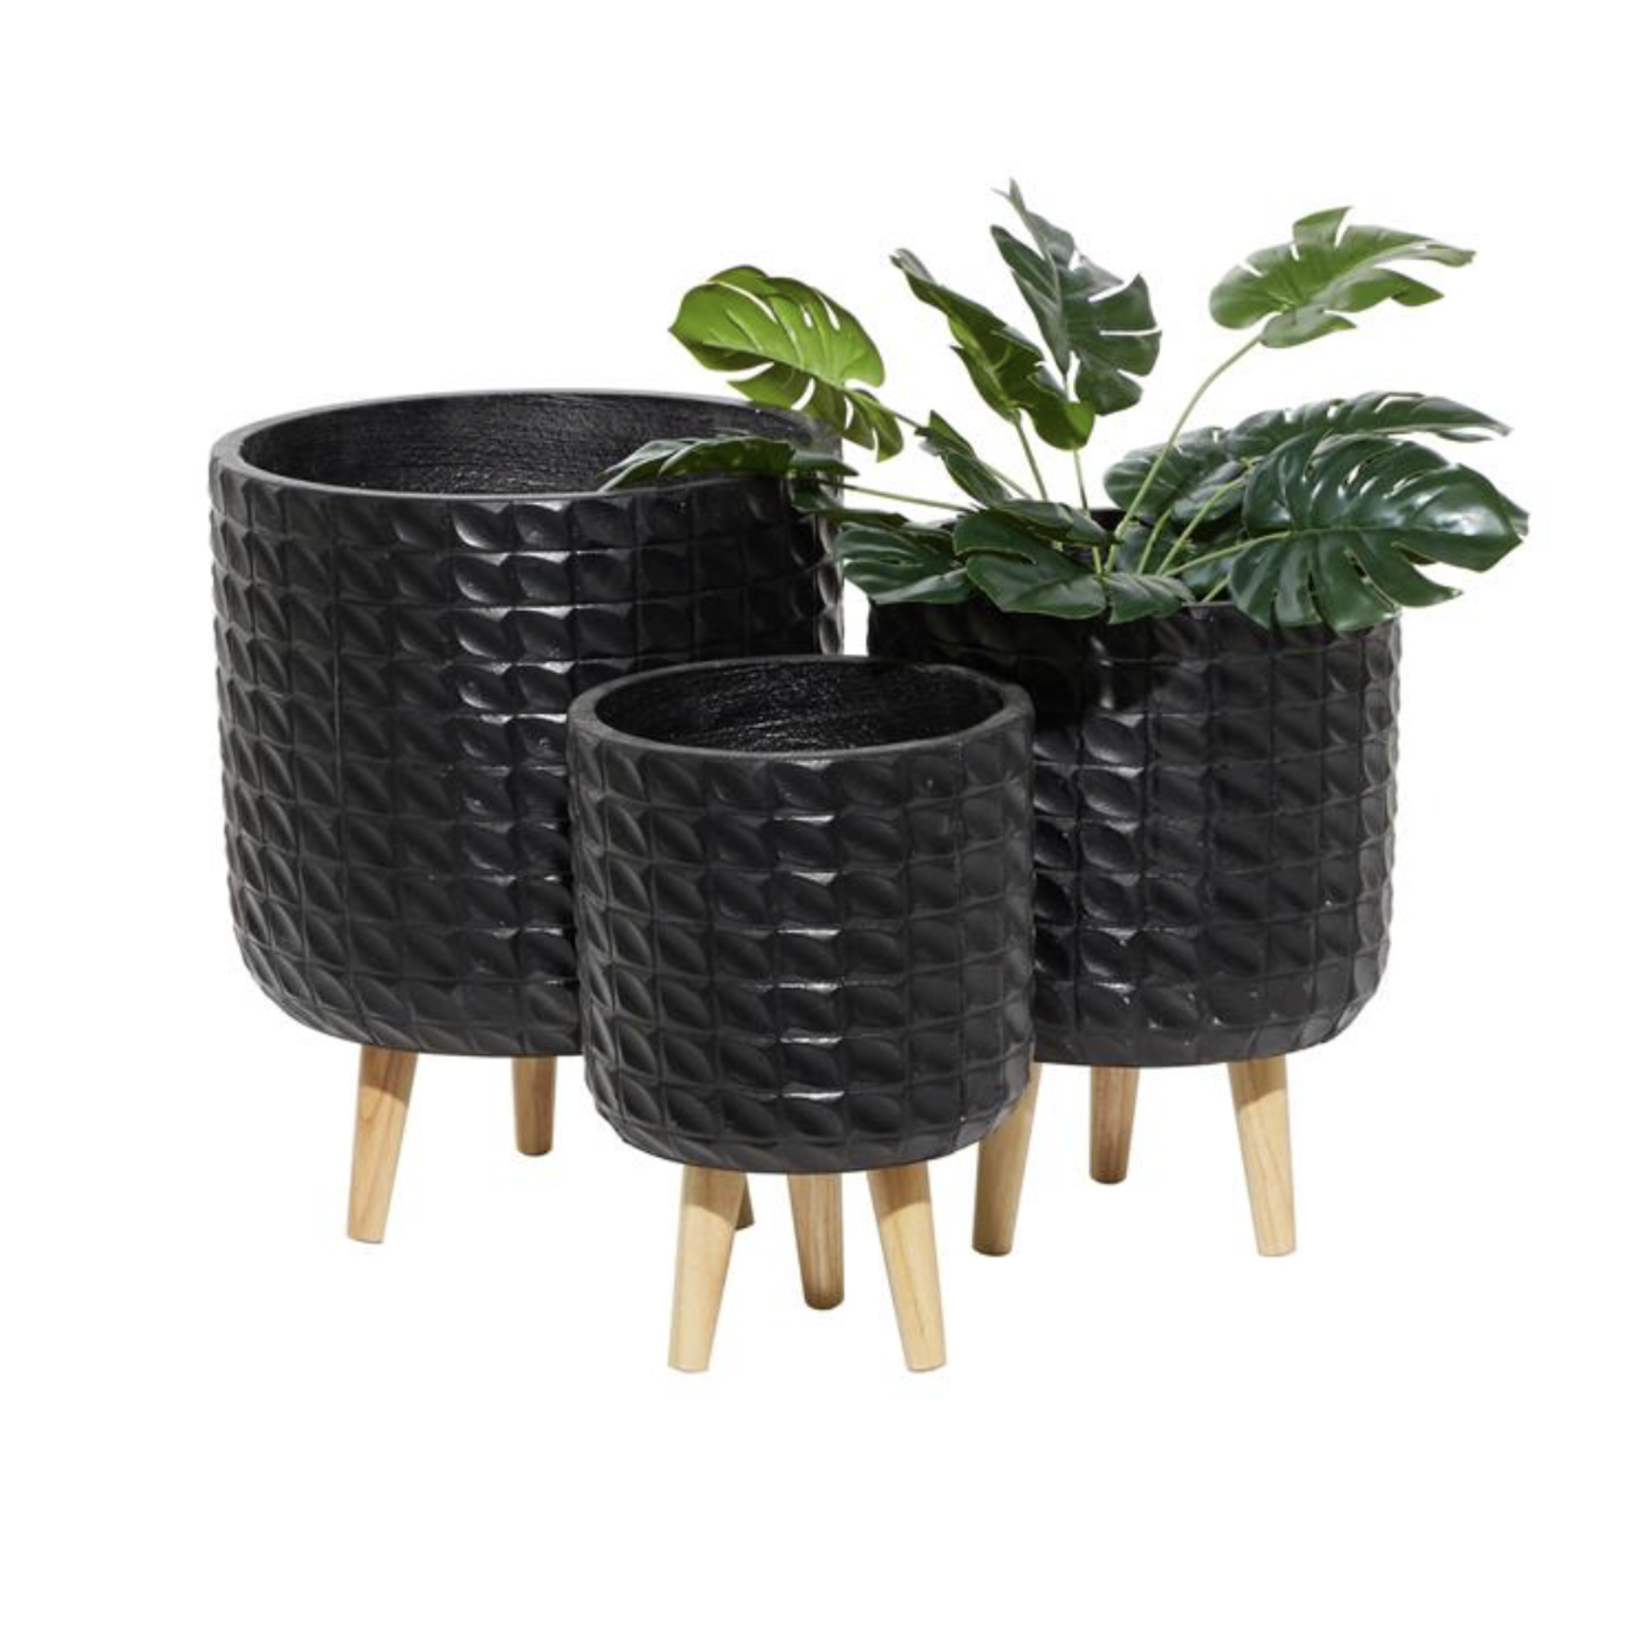 14”H X 10” SMALL MAGNESIUM OXIDE INDOOR OUTDOOR PLANTER WITH WOOD LEGS (NOT WATER TIGHT)